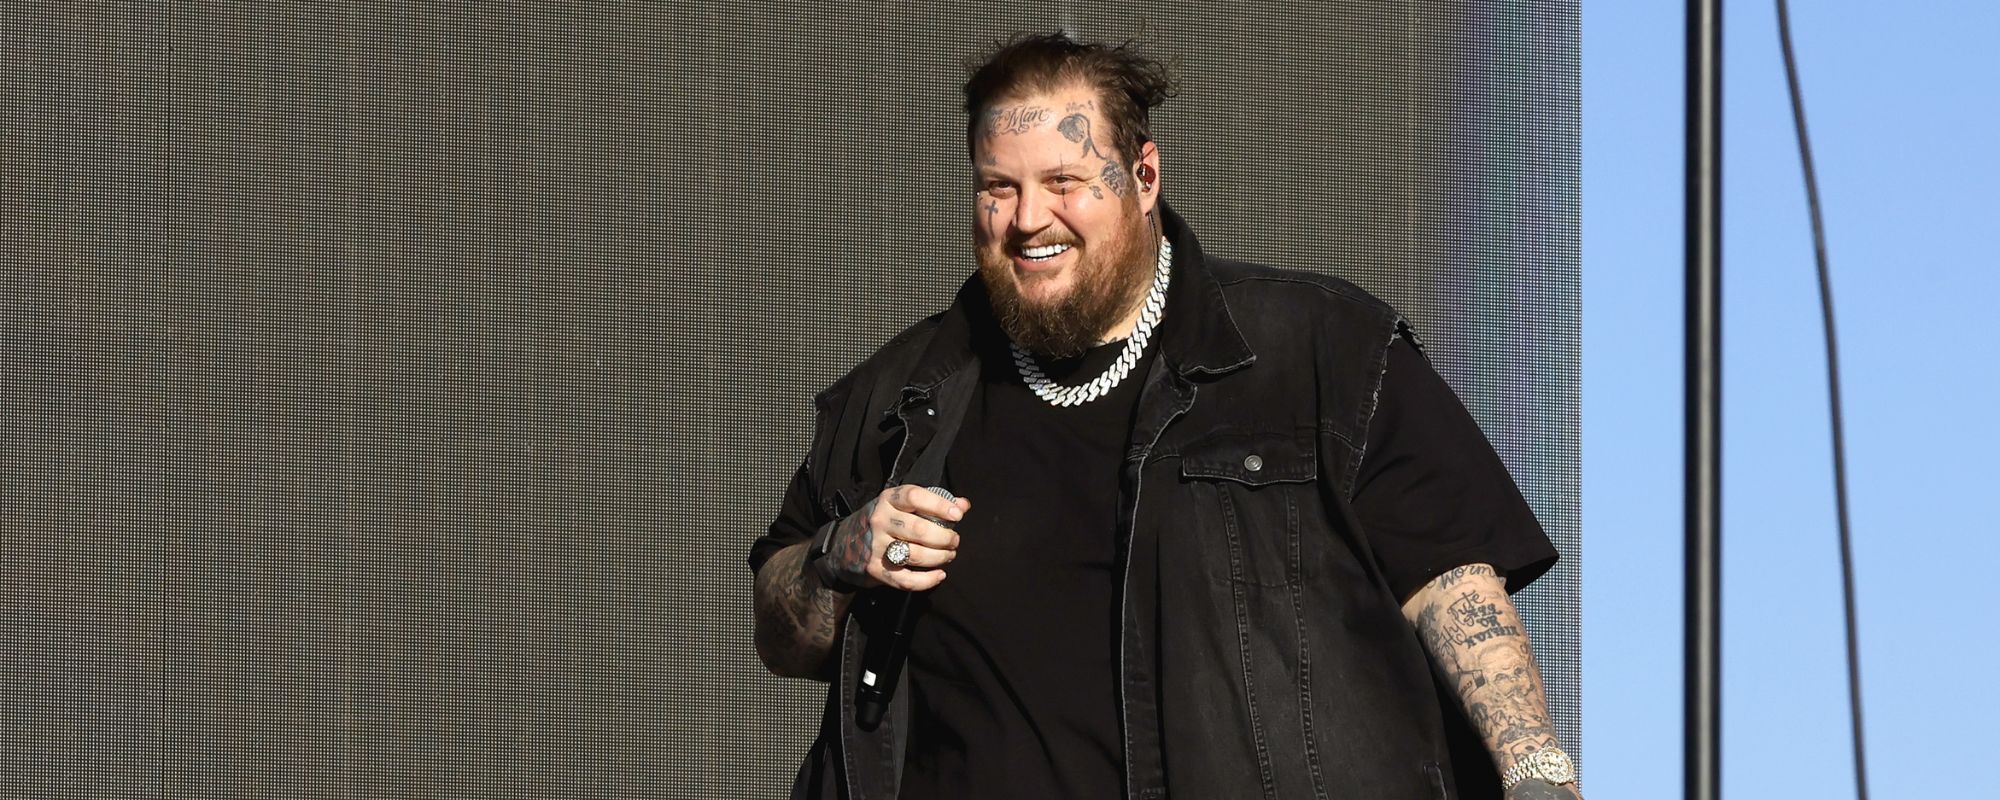 Jelly Roll Will Debut New Music At ACM Awards